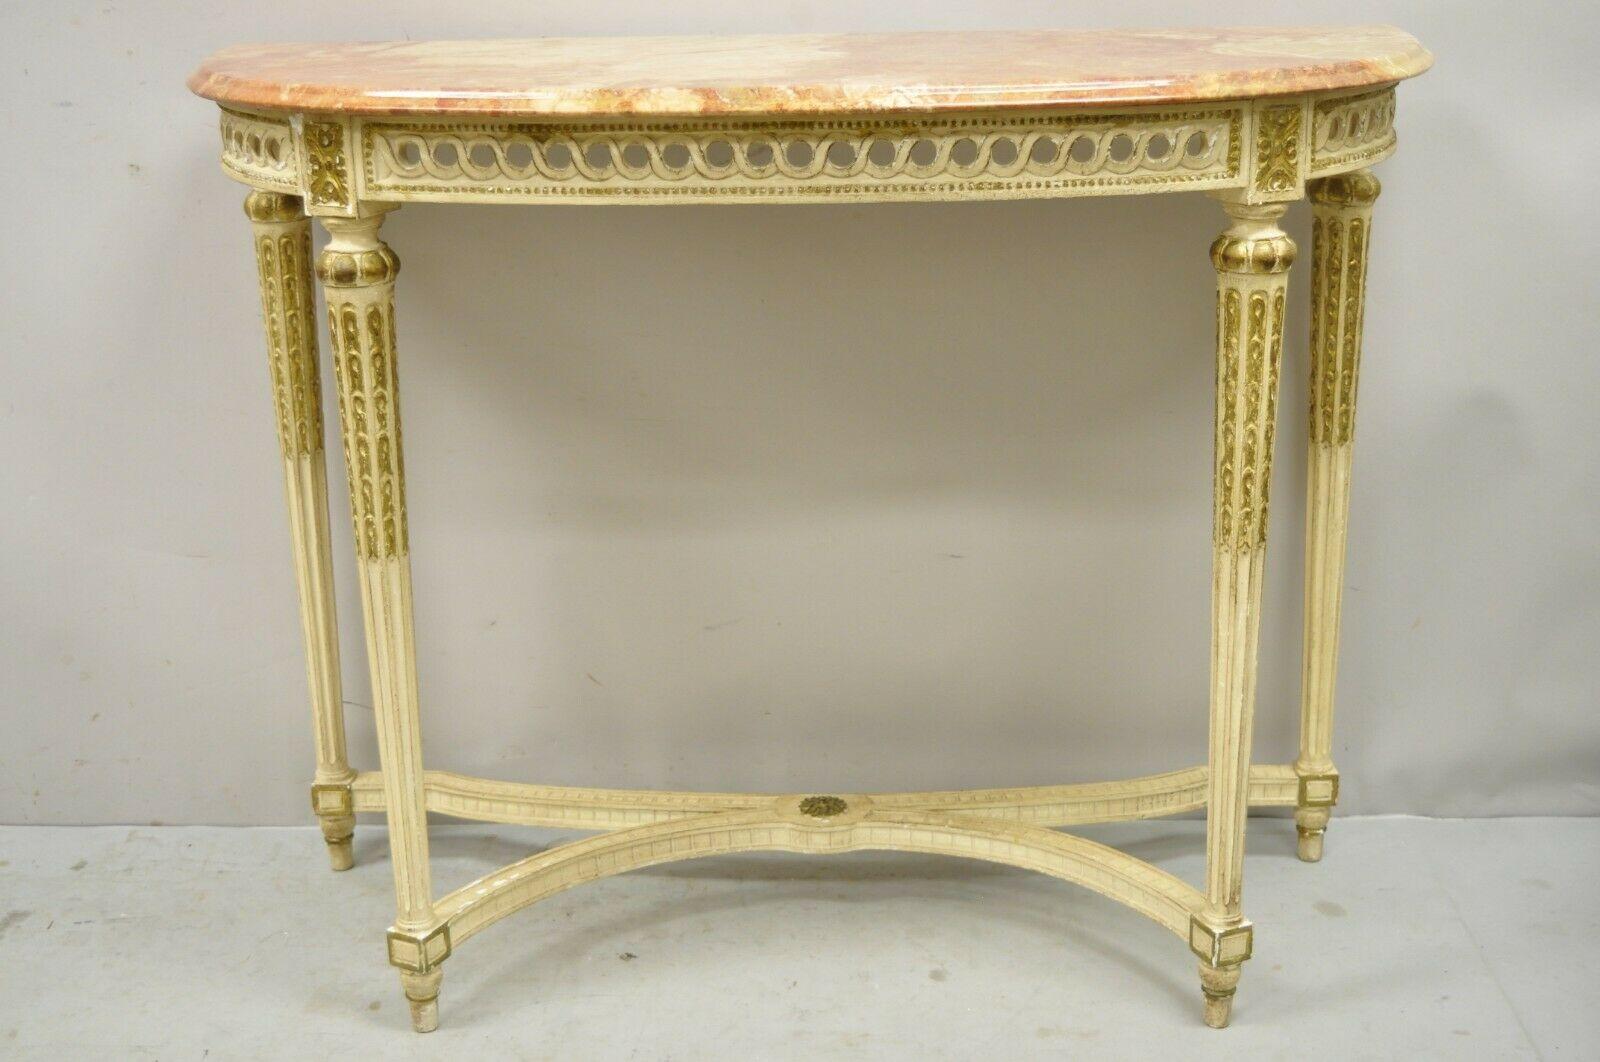 Vintage French Louis XVI Italian pink marble top demilune console hall table. Item features gold gilt details, shaped pink marble top, solid wood construction, tapered legs, quality Italian craftsmanship, great style and form. Circa Mid 20th